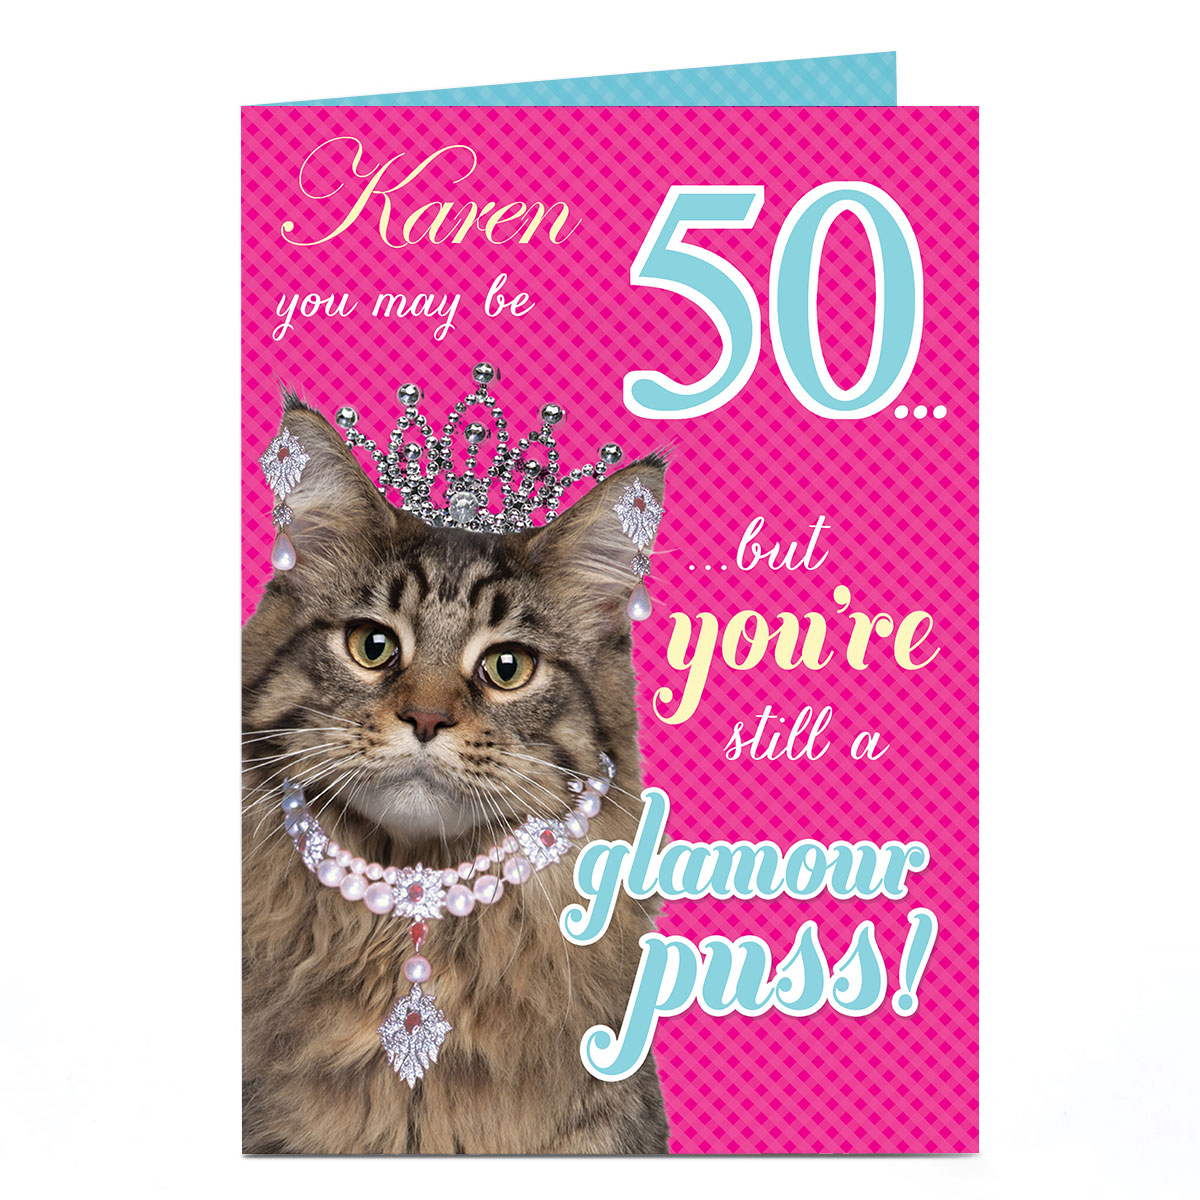 Personalised Birthday Card - Cat with Tiara, Editable Age